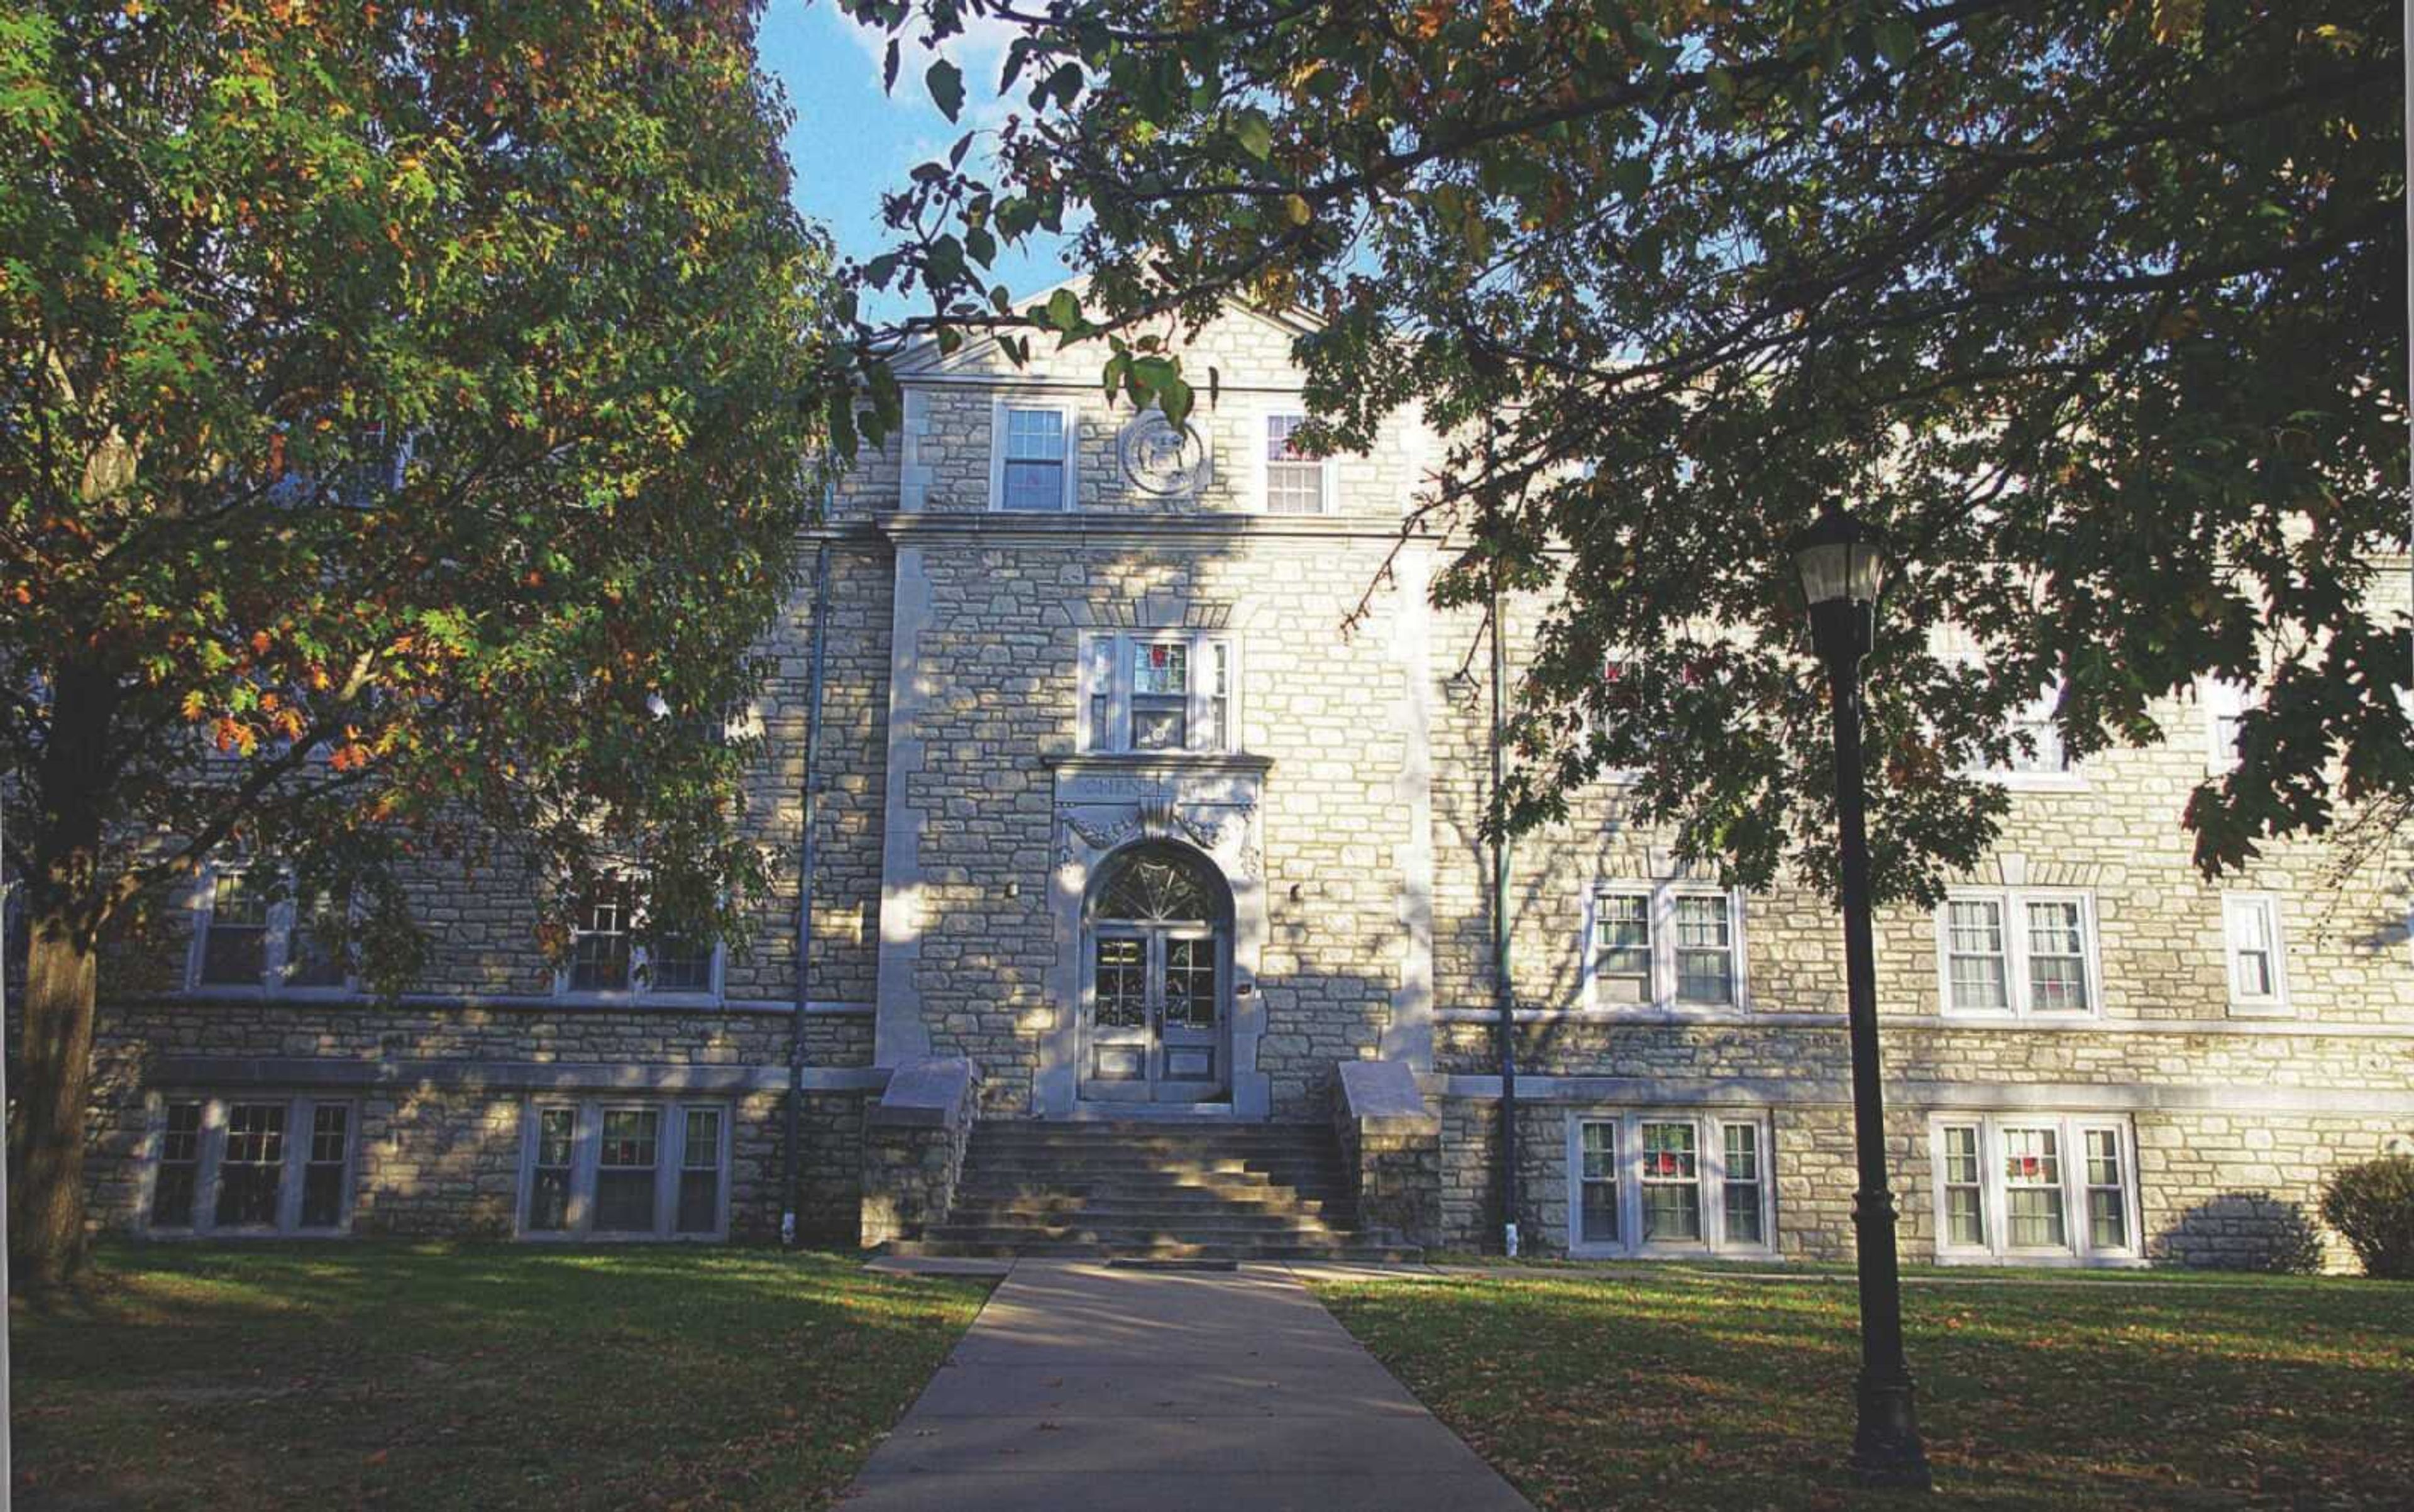 Cheney Hall closed next year due to future renovations